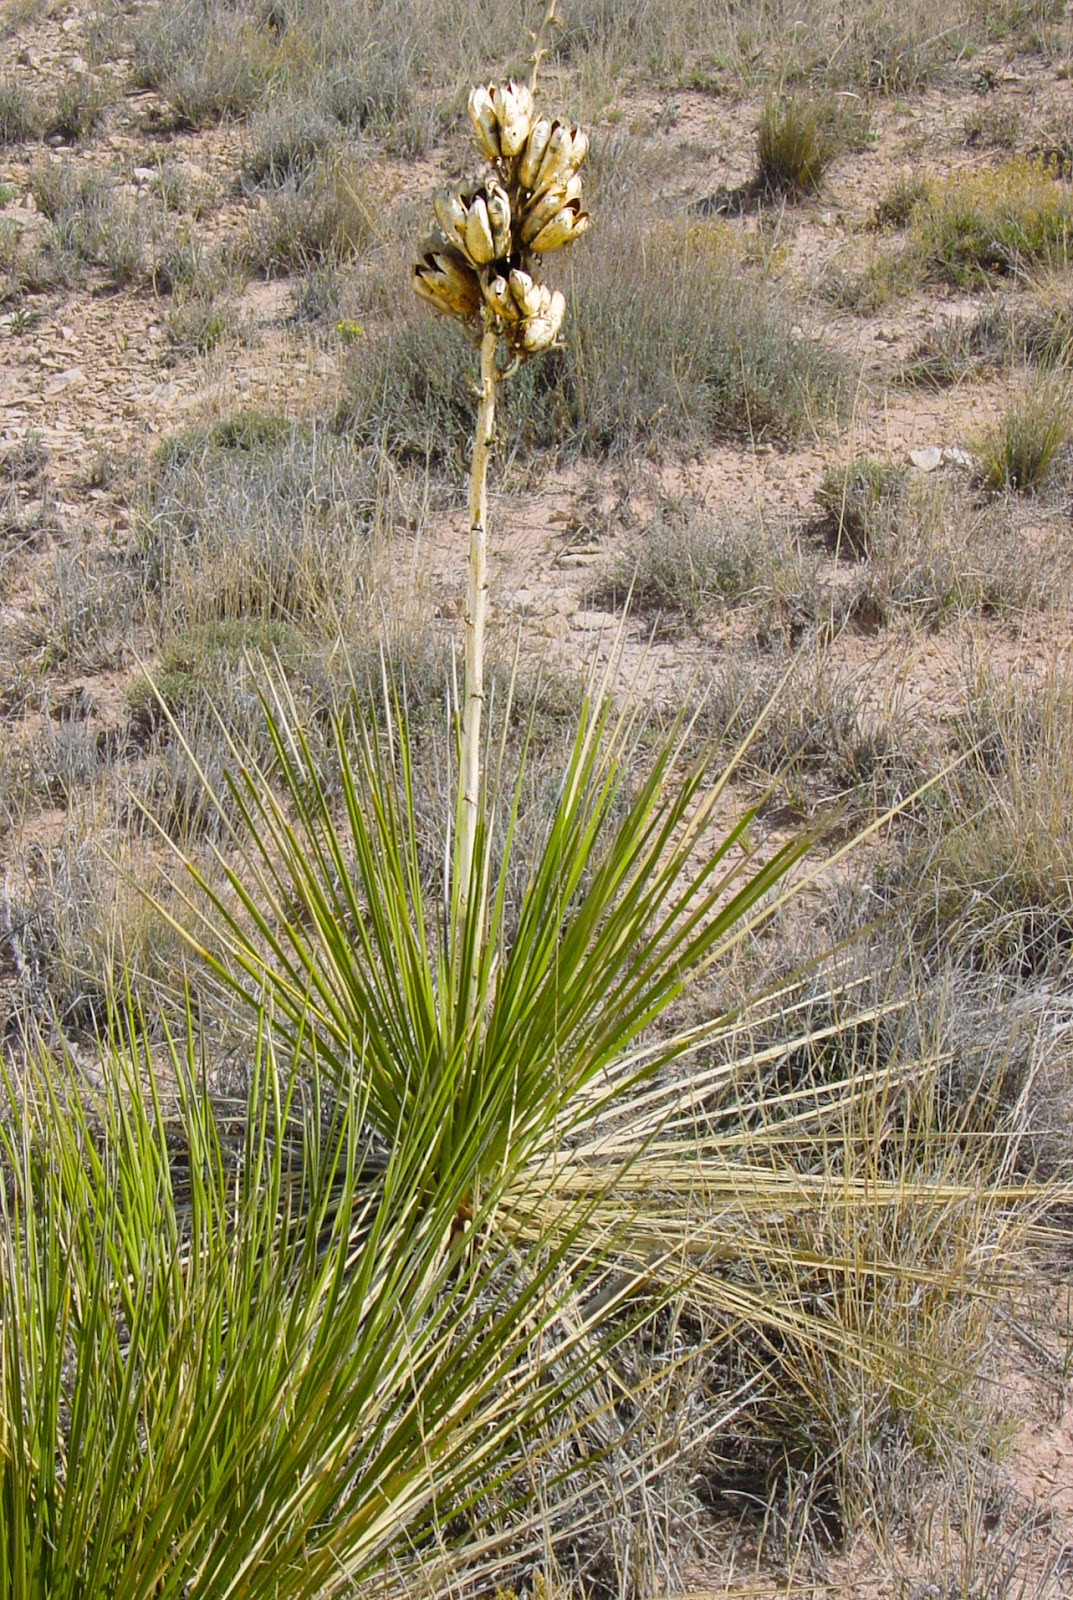 A tall desert plat is dry and brown with green leaves